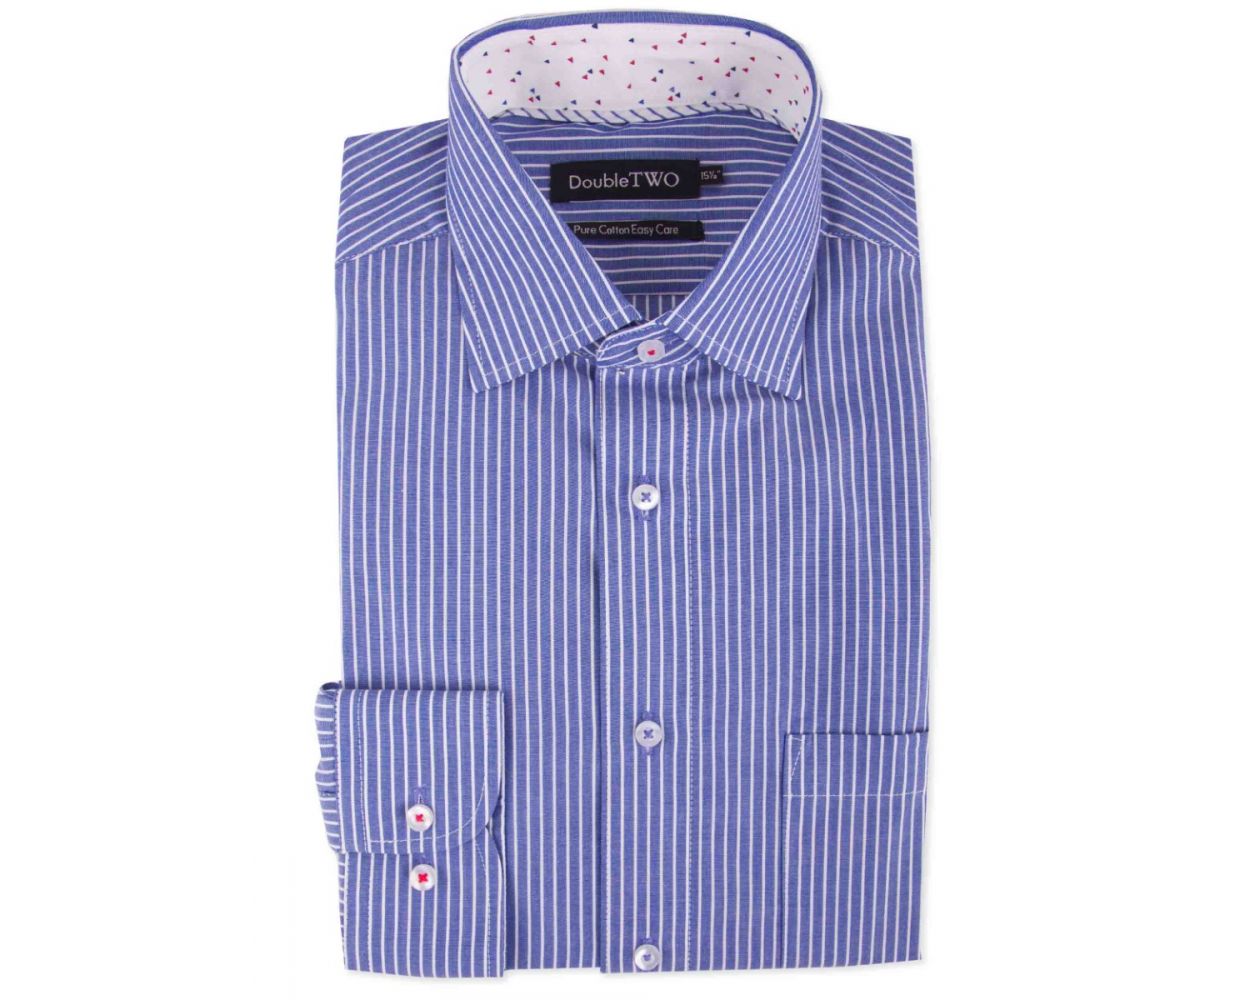 Blue and White Pin Stripe Formal Shirt | Double TWO